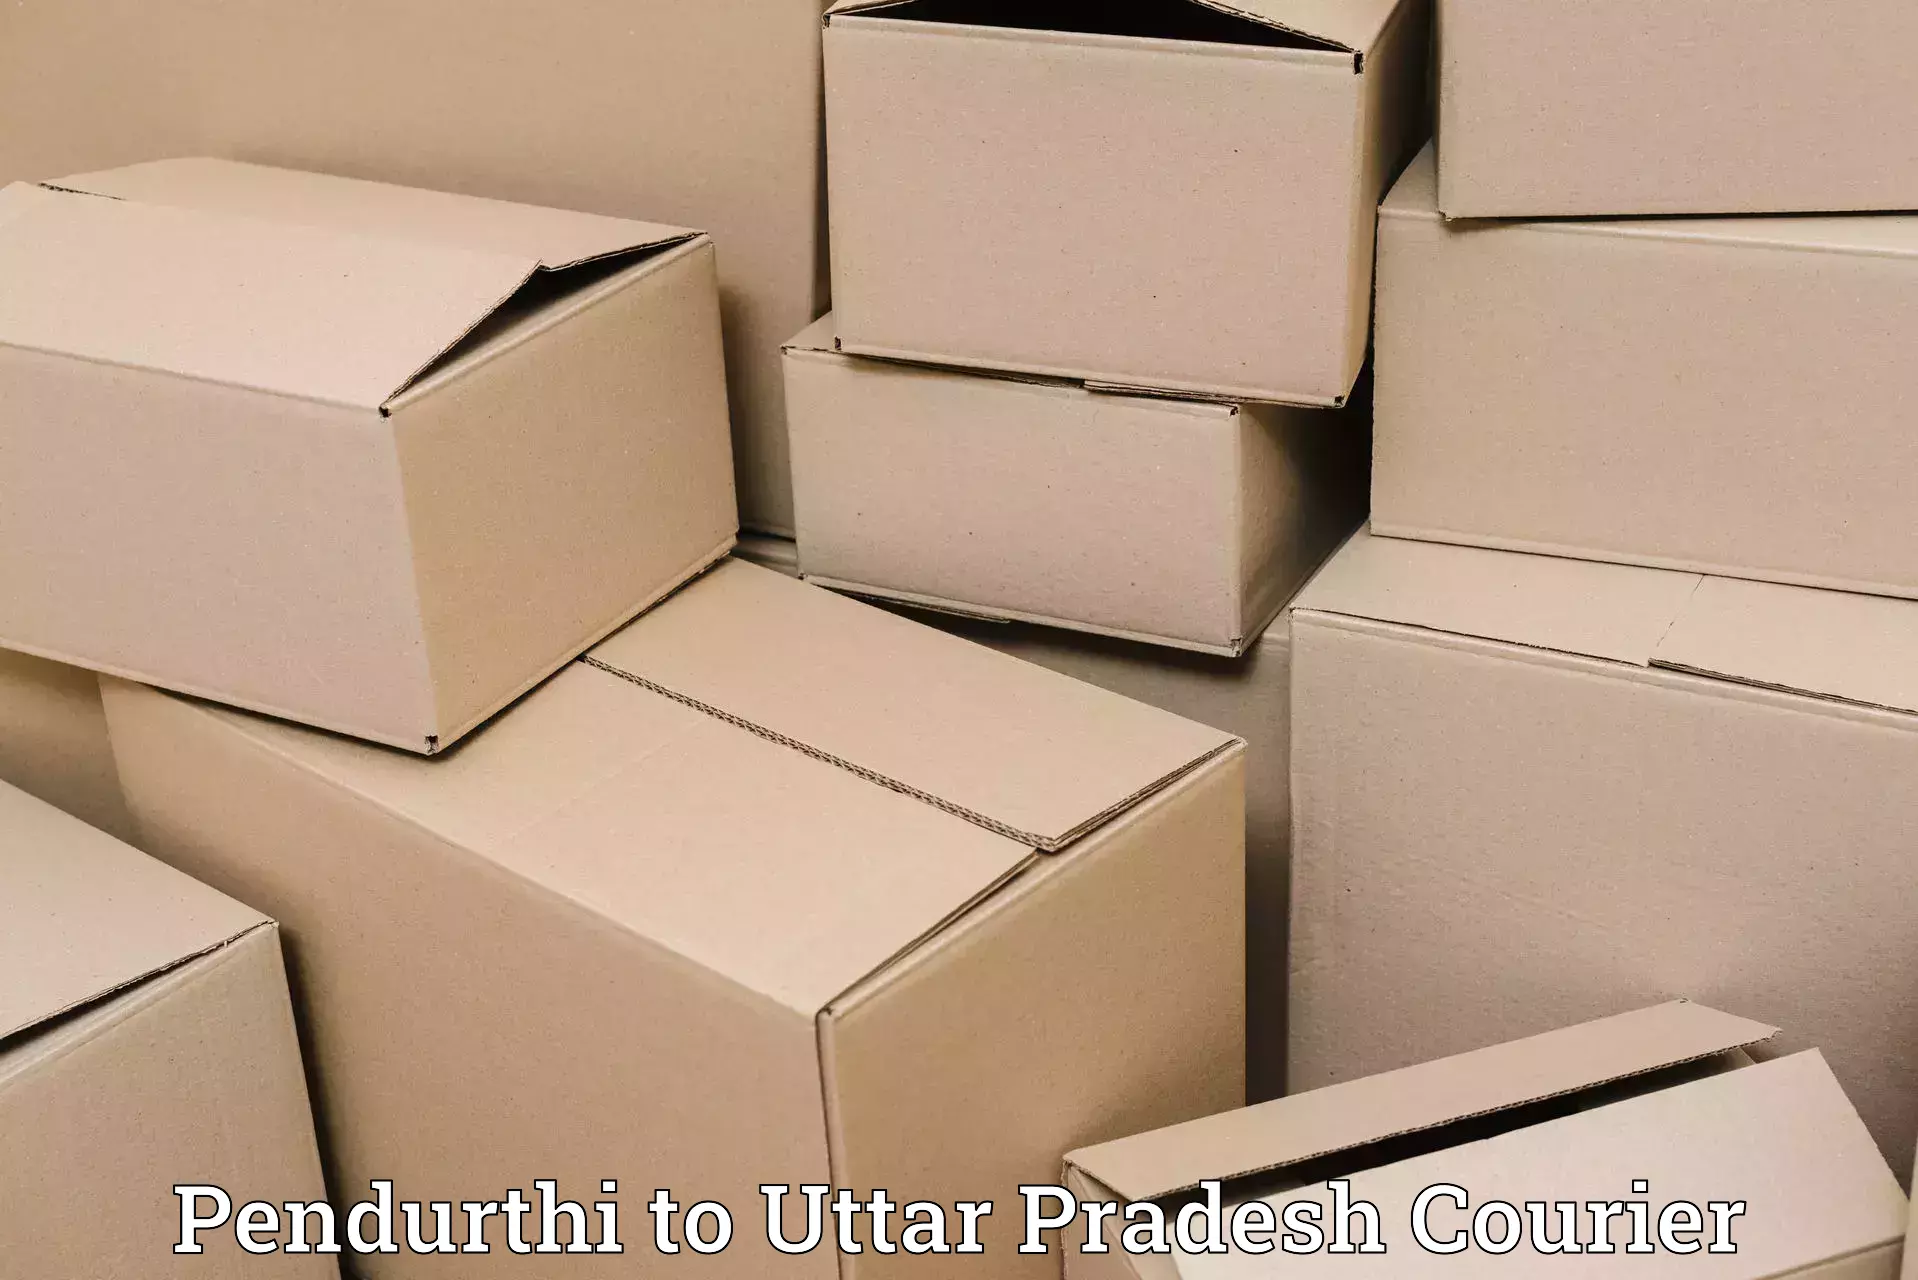 Cost-effective shipping solutions Pendurthi to Allahabad